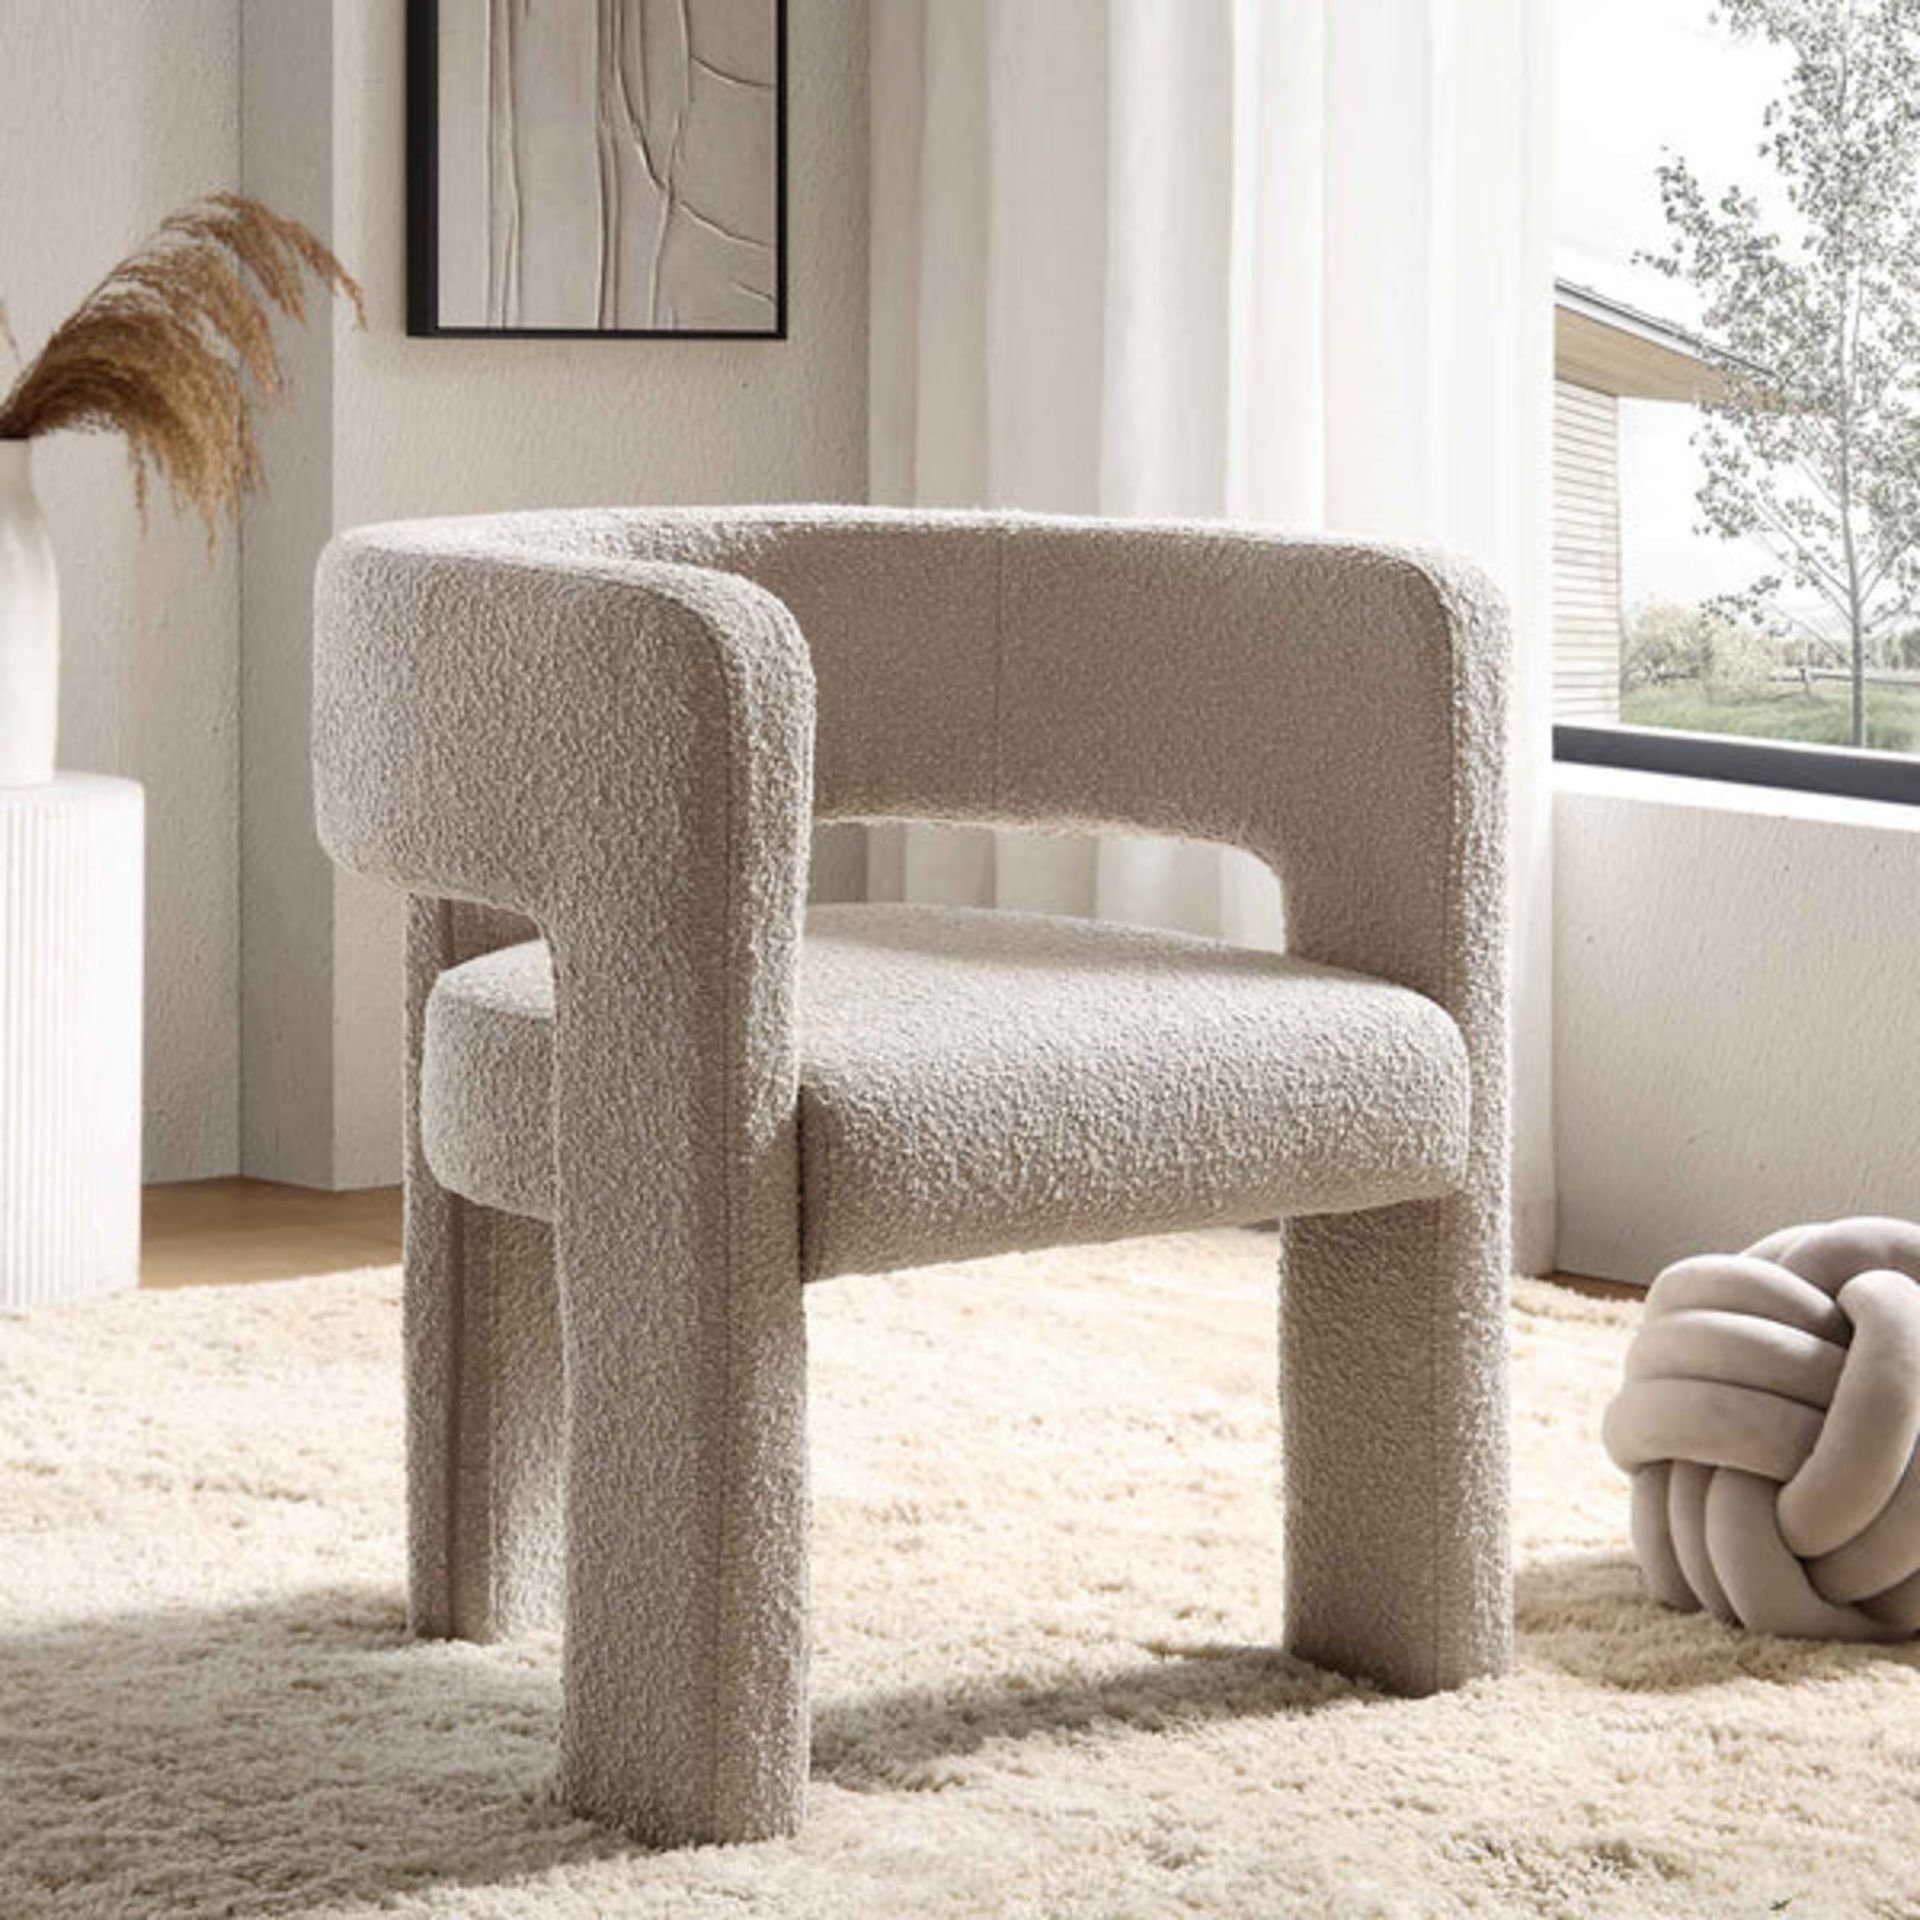 Greenwich Light Taupe Boucle Dining Chair. - BI. Our beautiful Greenwich chair features curved